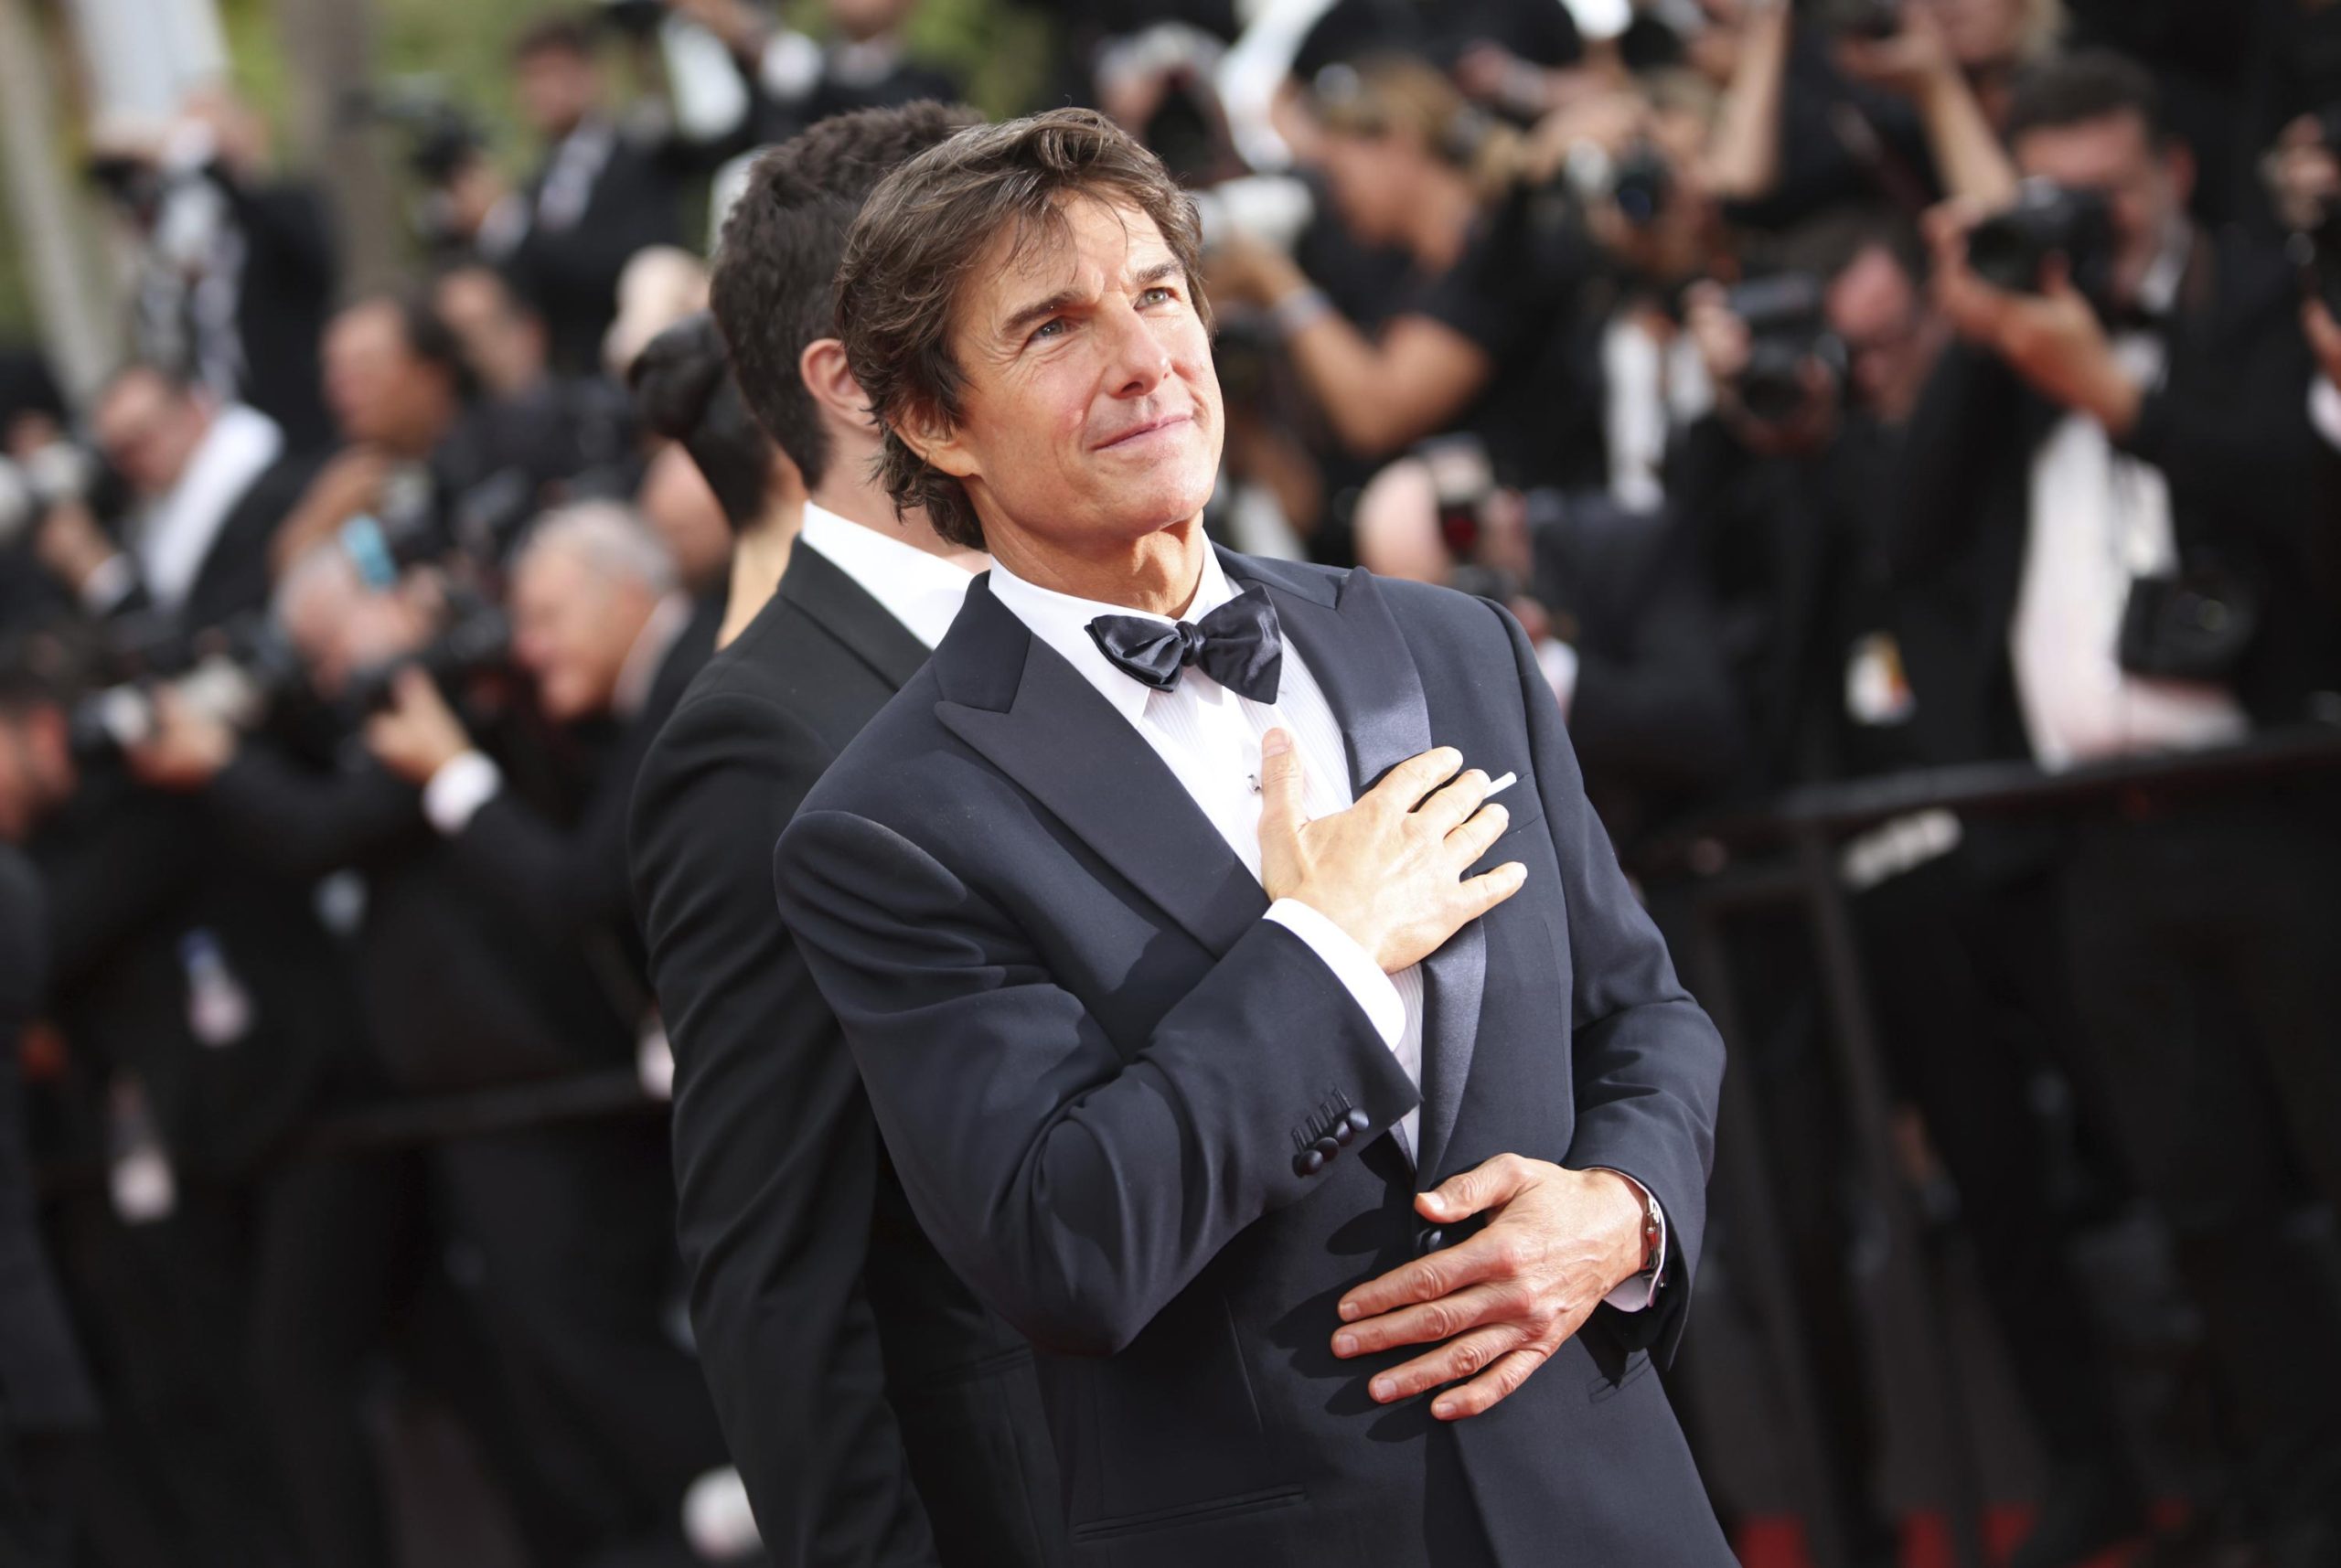 Tom Cruise attending an event.